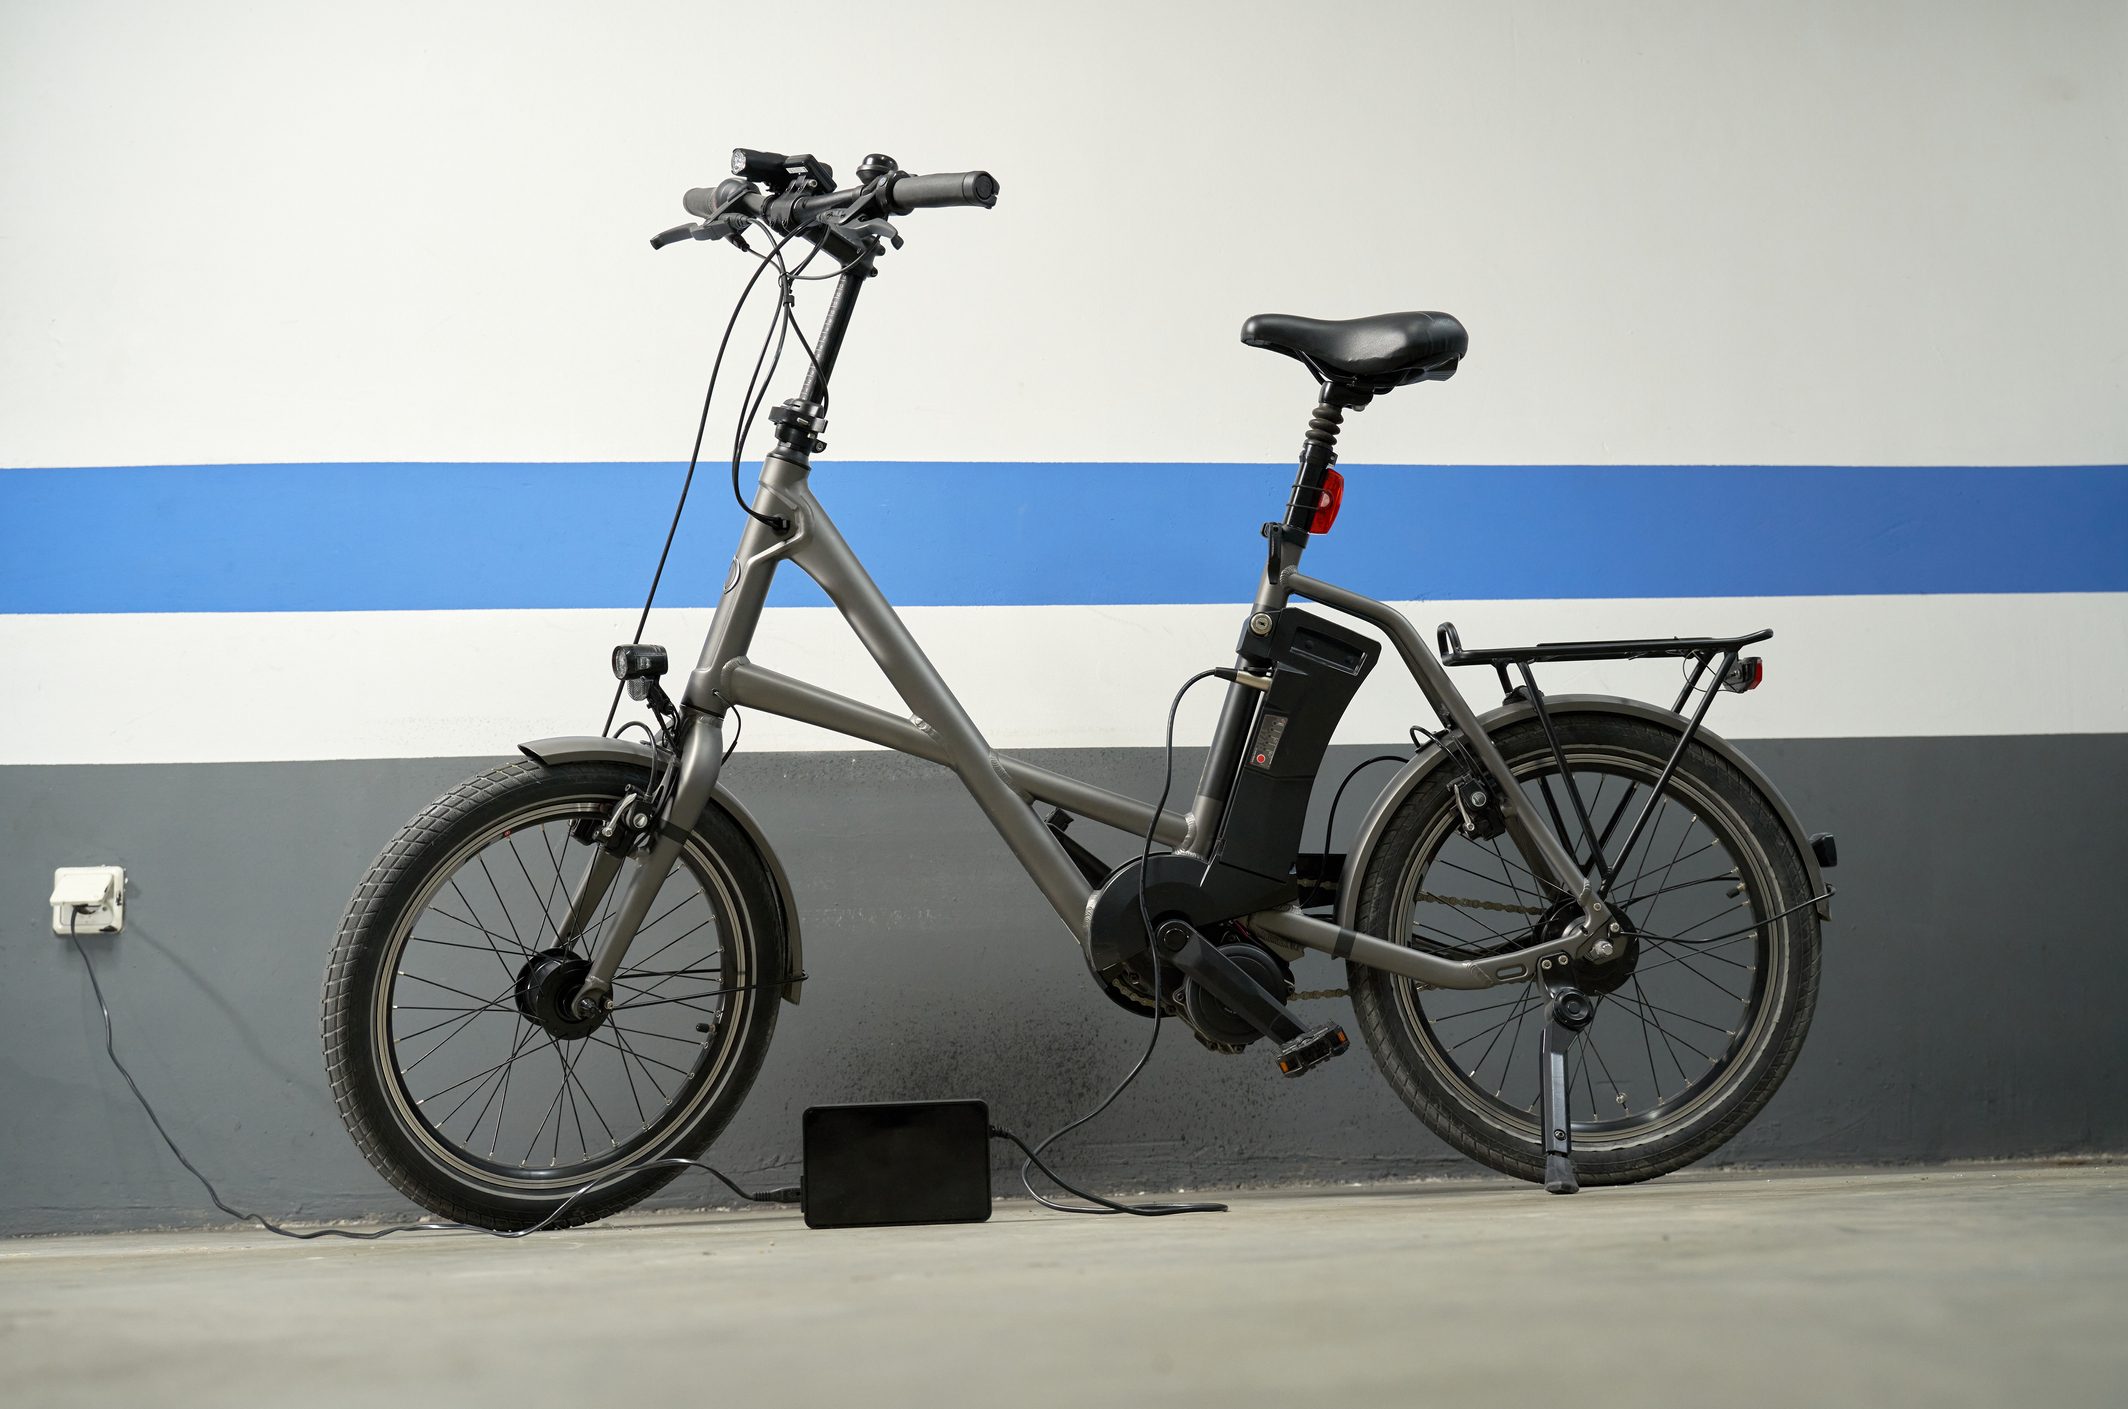 Electric bicycle charging the electrical battery at garage. Environmental concept.